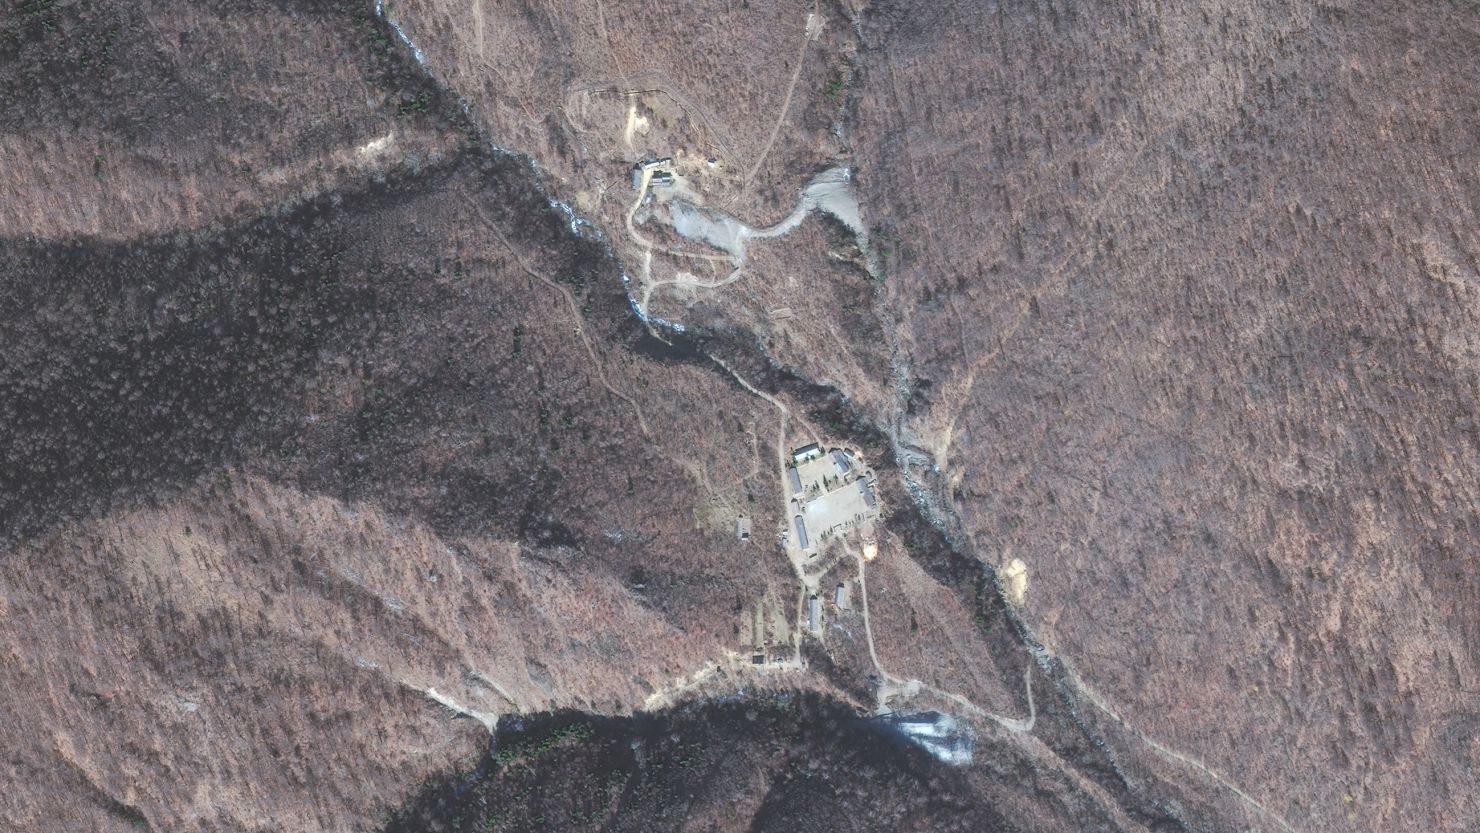 Satellite images obtained by a nuclear security think tank in 2010 show a uranium enrichment facility in North Korea.